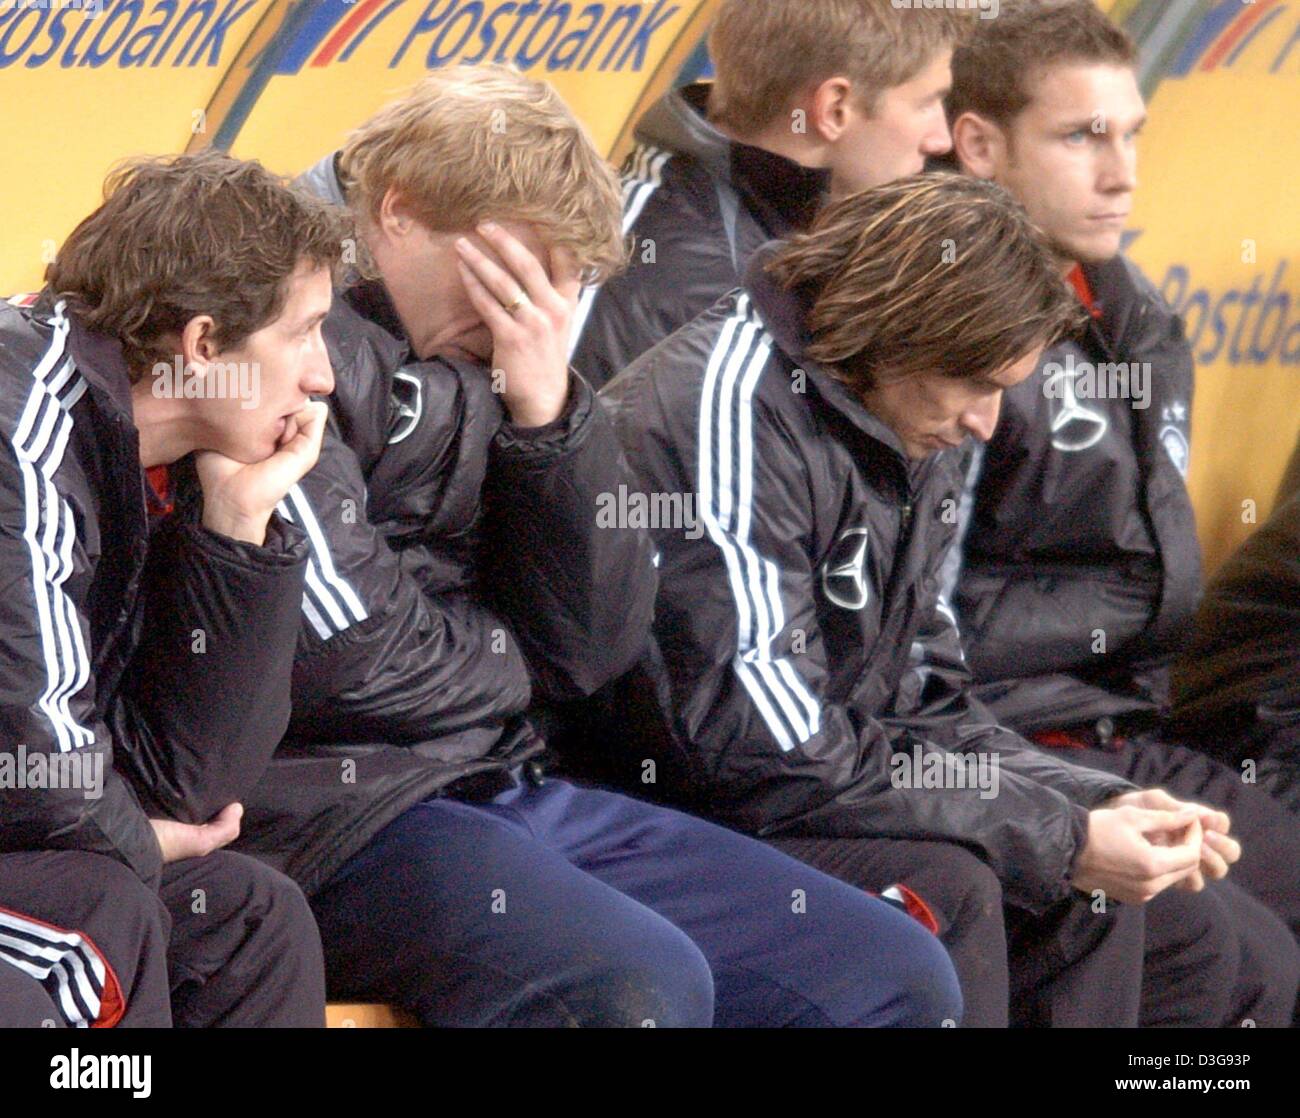 (dpa) - Germany's goalkeeper Oliver Kahn (2nd from L) covers his face with his hand sitting on the substitute bench during the match opposing Germany and Cameroon in Leipzig, Germany, 17 November 2004. From L sitting are: Frank Baumann, Kahn, Thomas Brdaric, Thomas Hitzlsberger and Moritz Volz. Germany won 3-0. Stock Photo